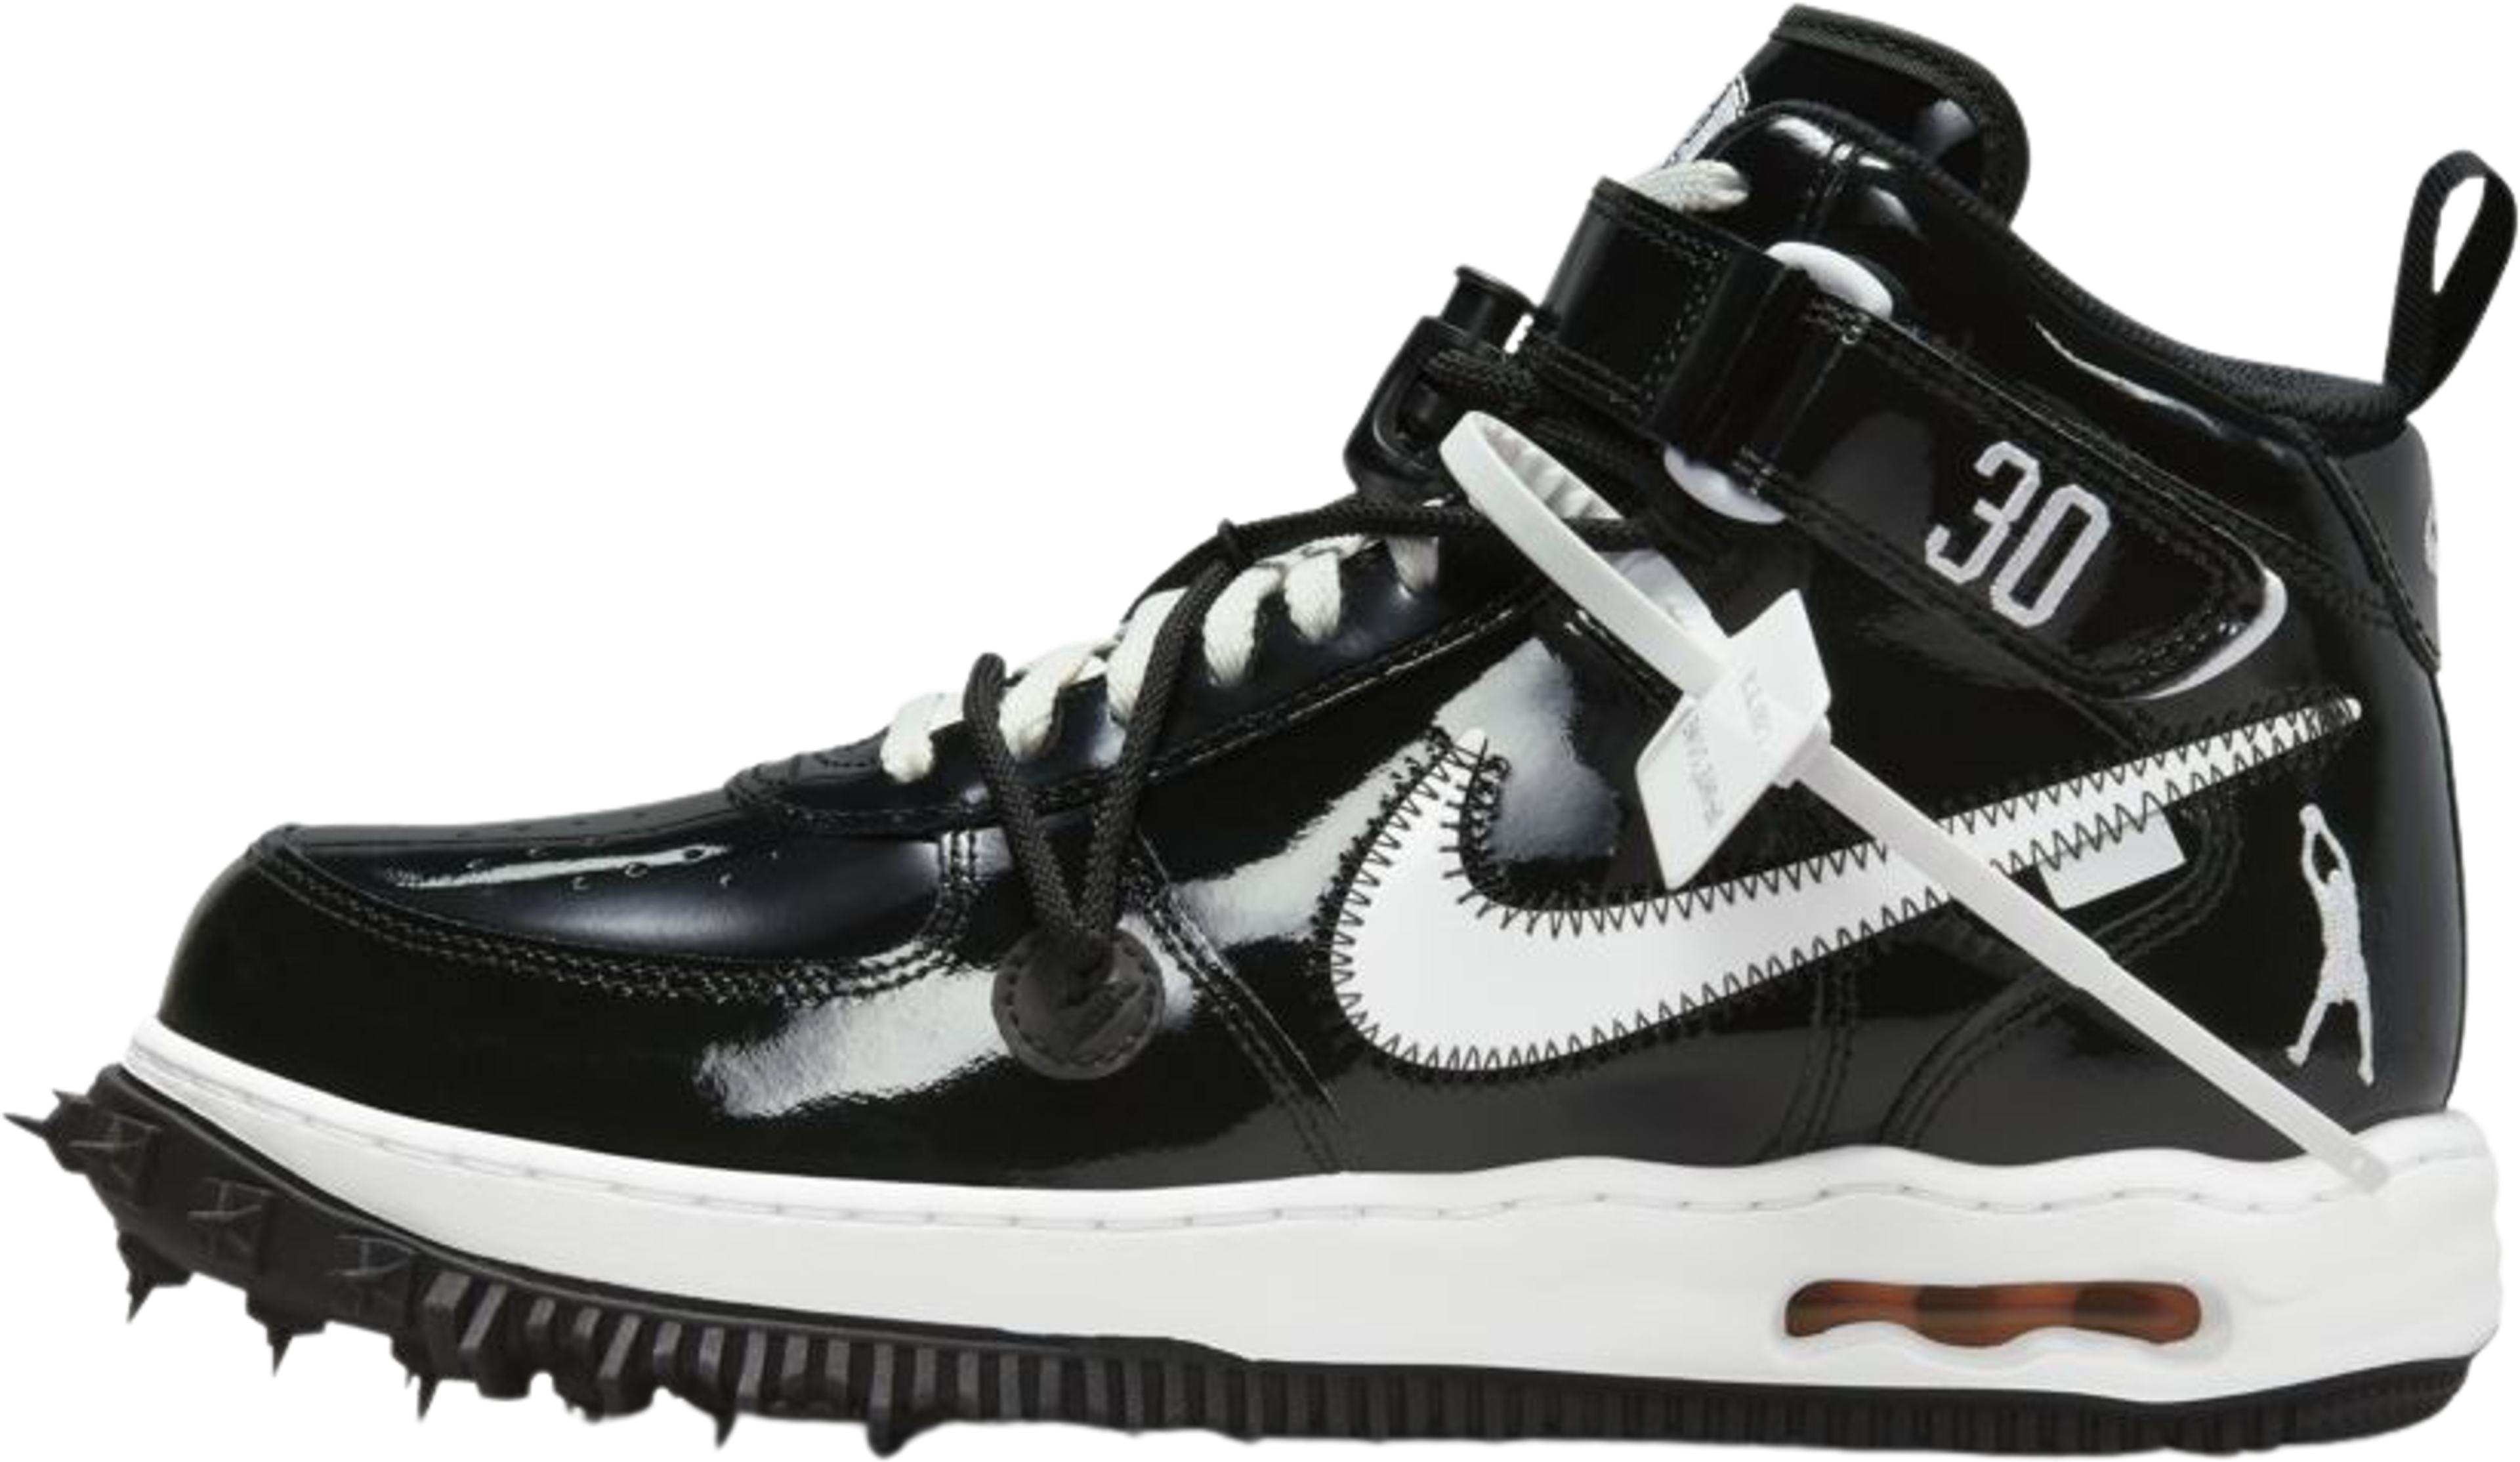 Nike Air Force 1 Mid Off-White Sheed